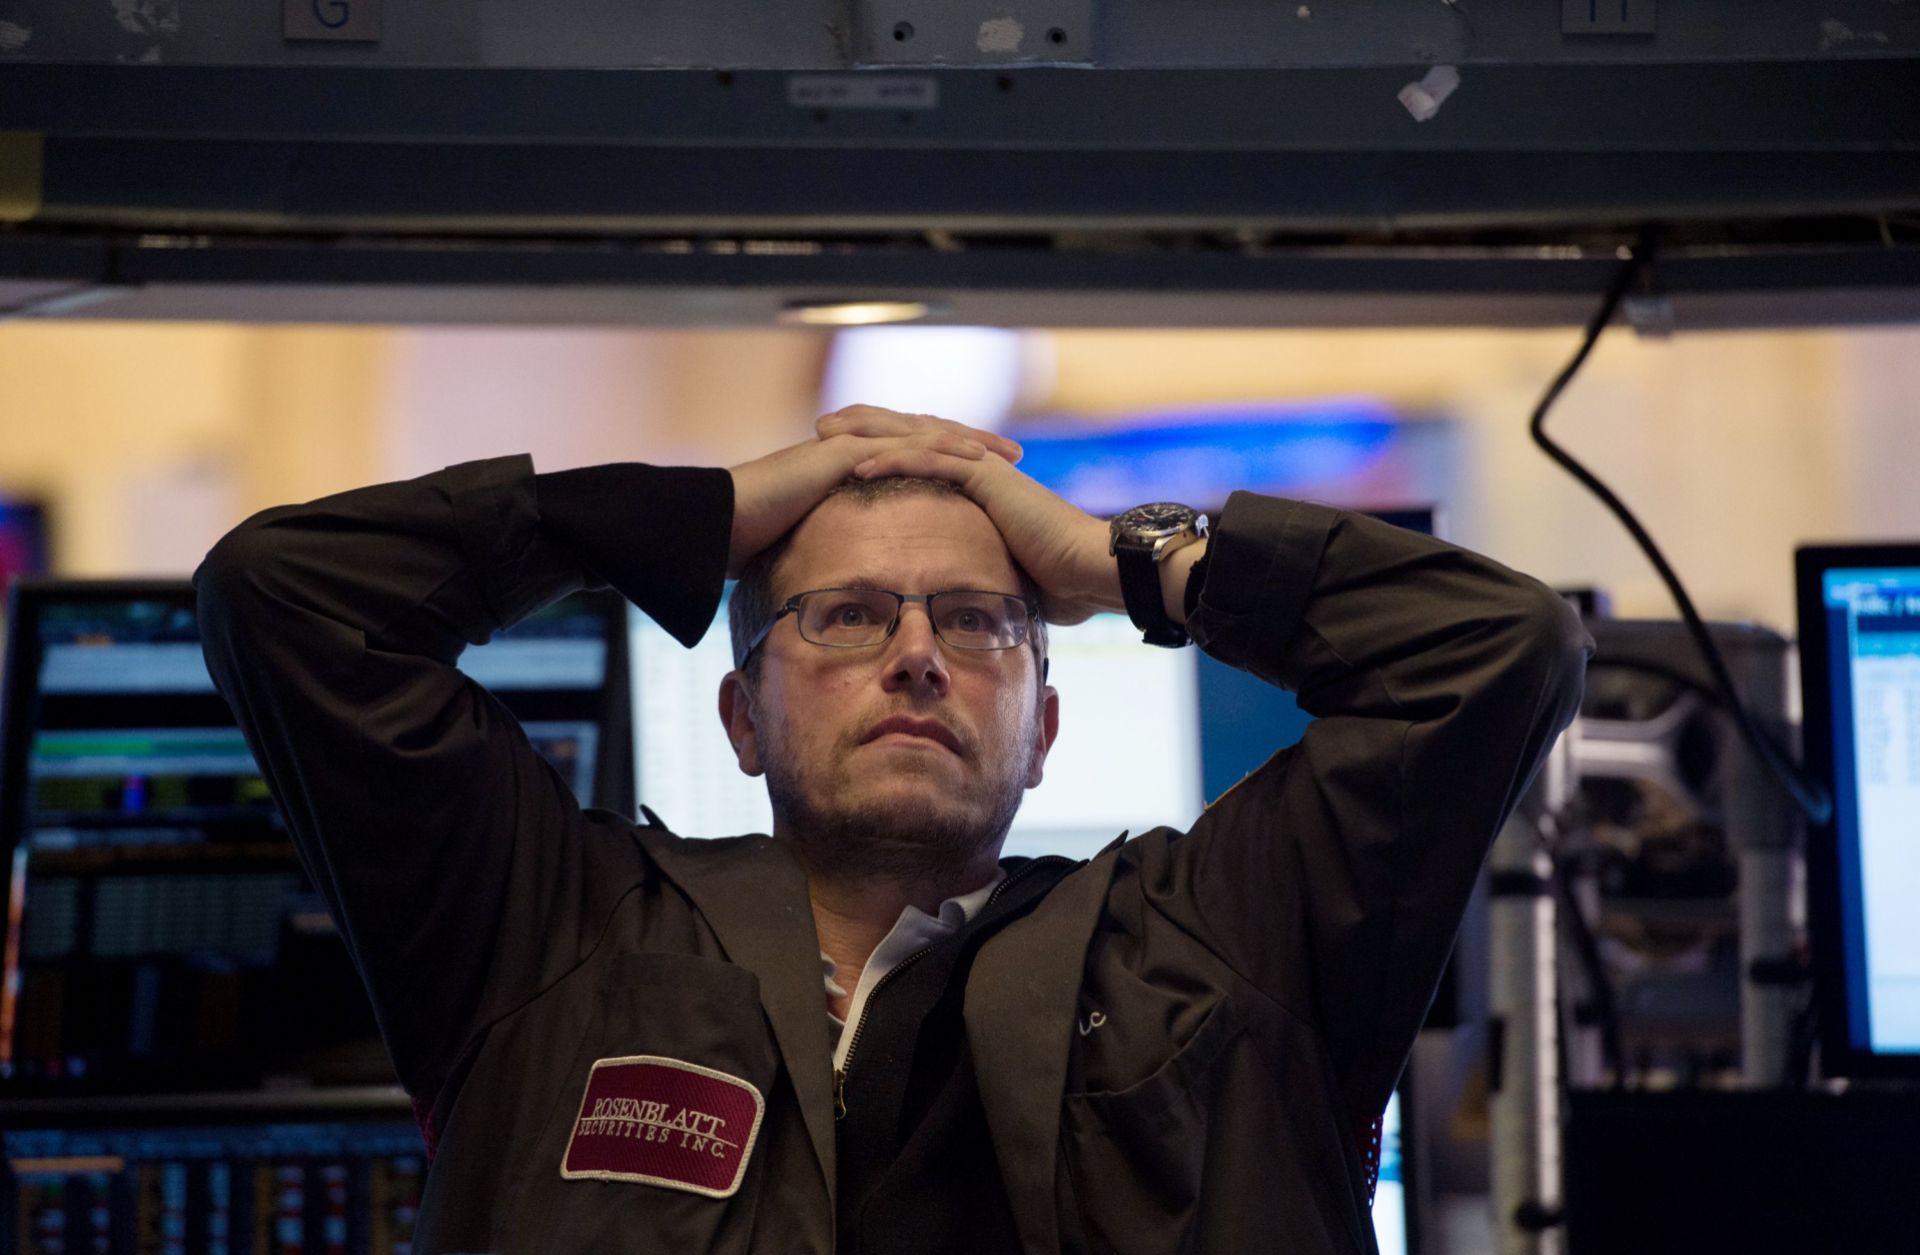 A trader on the floor of the New York Stock Exchange on Feb. 5, 2018.